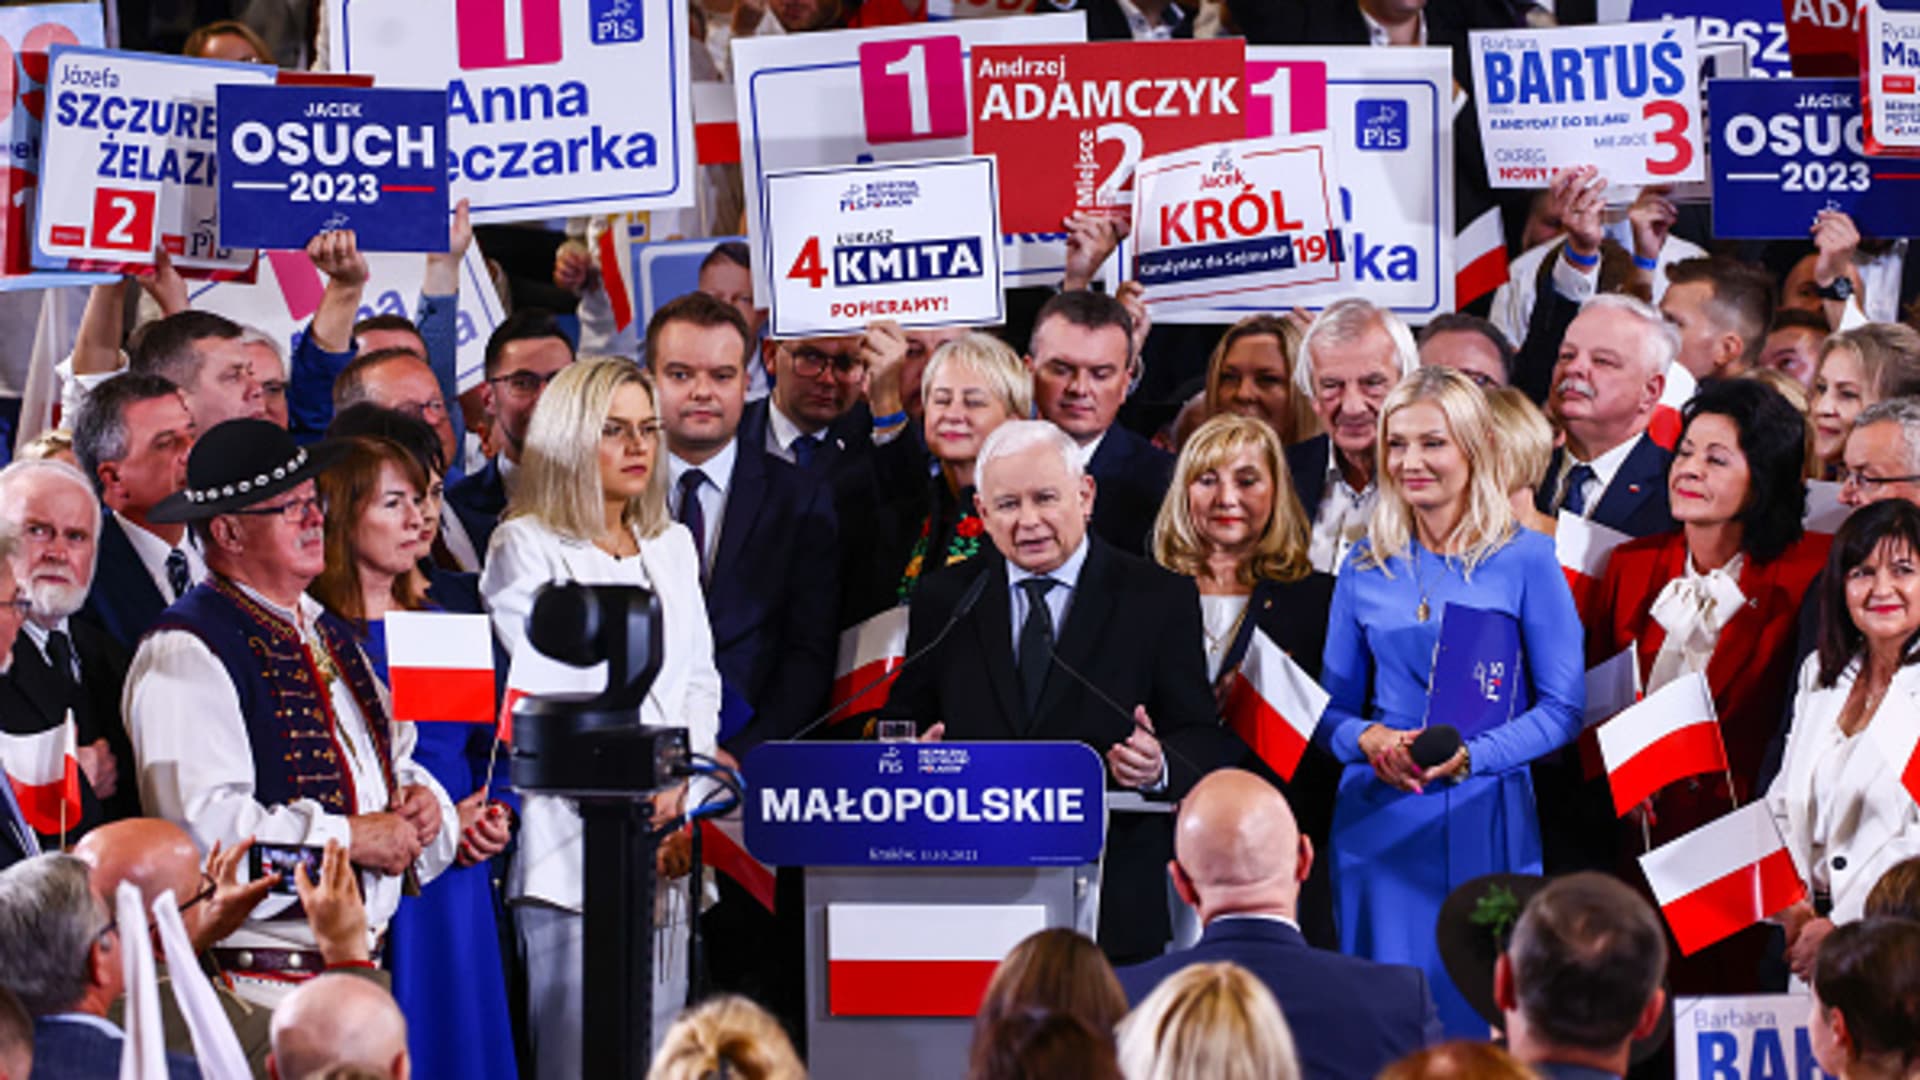 Jaroslaw Kaczynski, the leader of Law and Justice (PiS) ruling party, gives a speech during a final convention of elections campaign in Krakow, Poland on October 11, 2023.